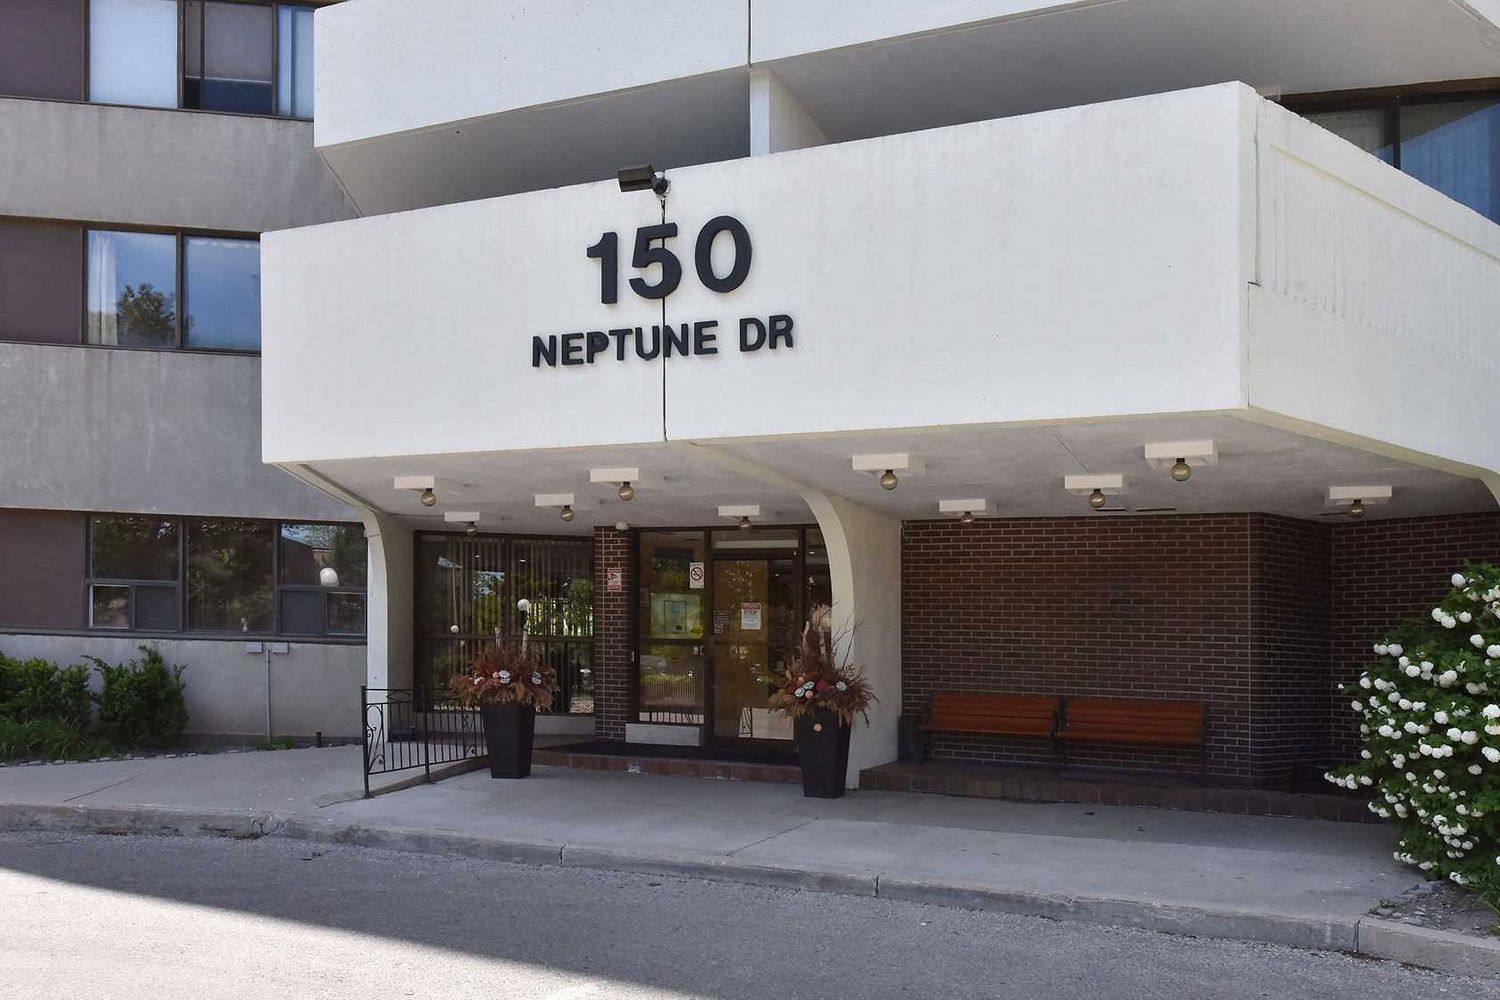 150 Neptune Dr. This condo at 150 Neptune Drive Condos is located in  North York, Toronto - image #2 of 2 by Strata.ca